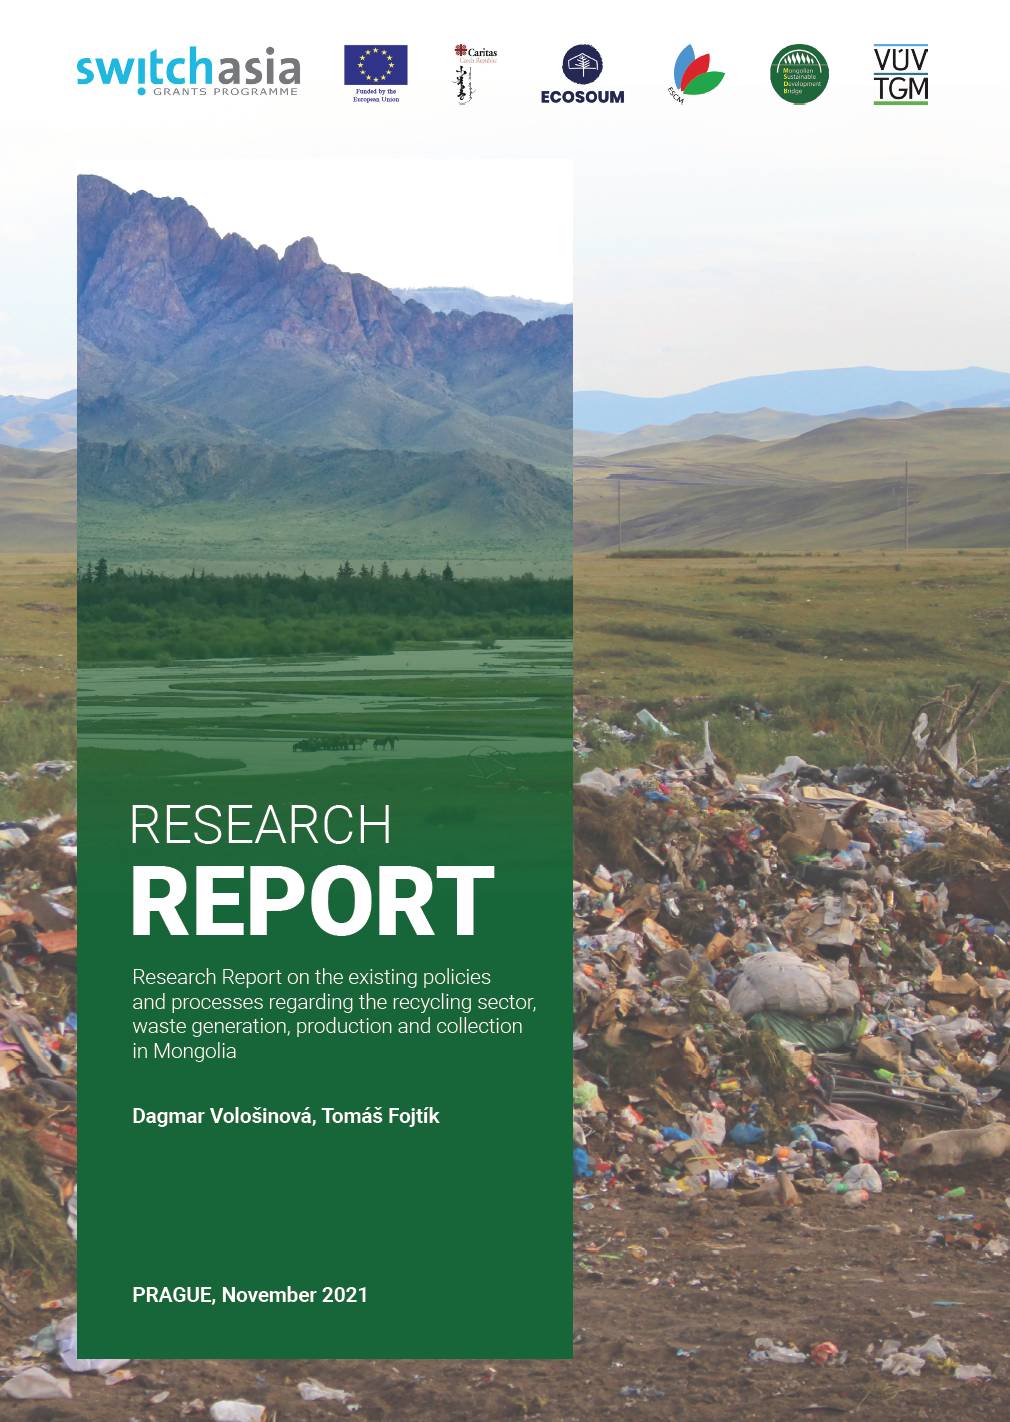 Existing policies and processes regarding the recycling sector, waste generation, production and collection in Mongolia